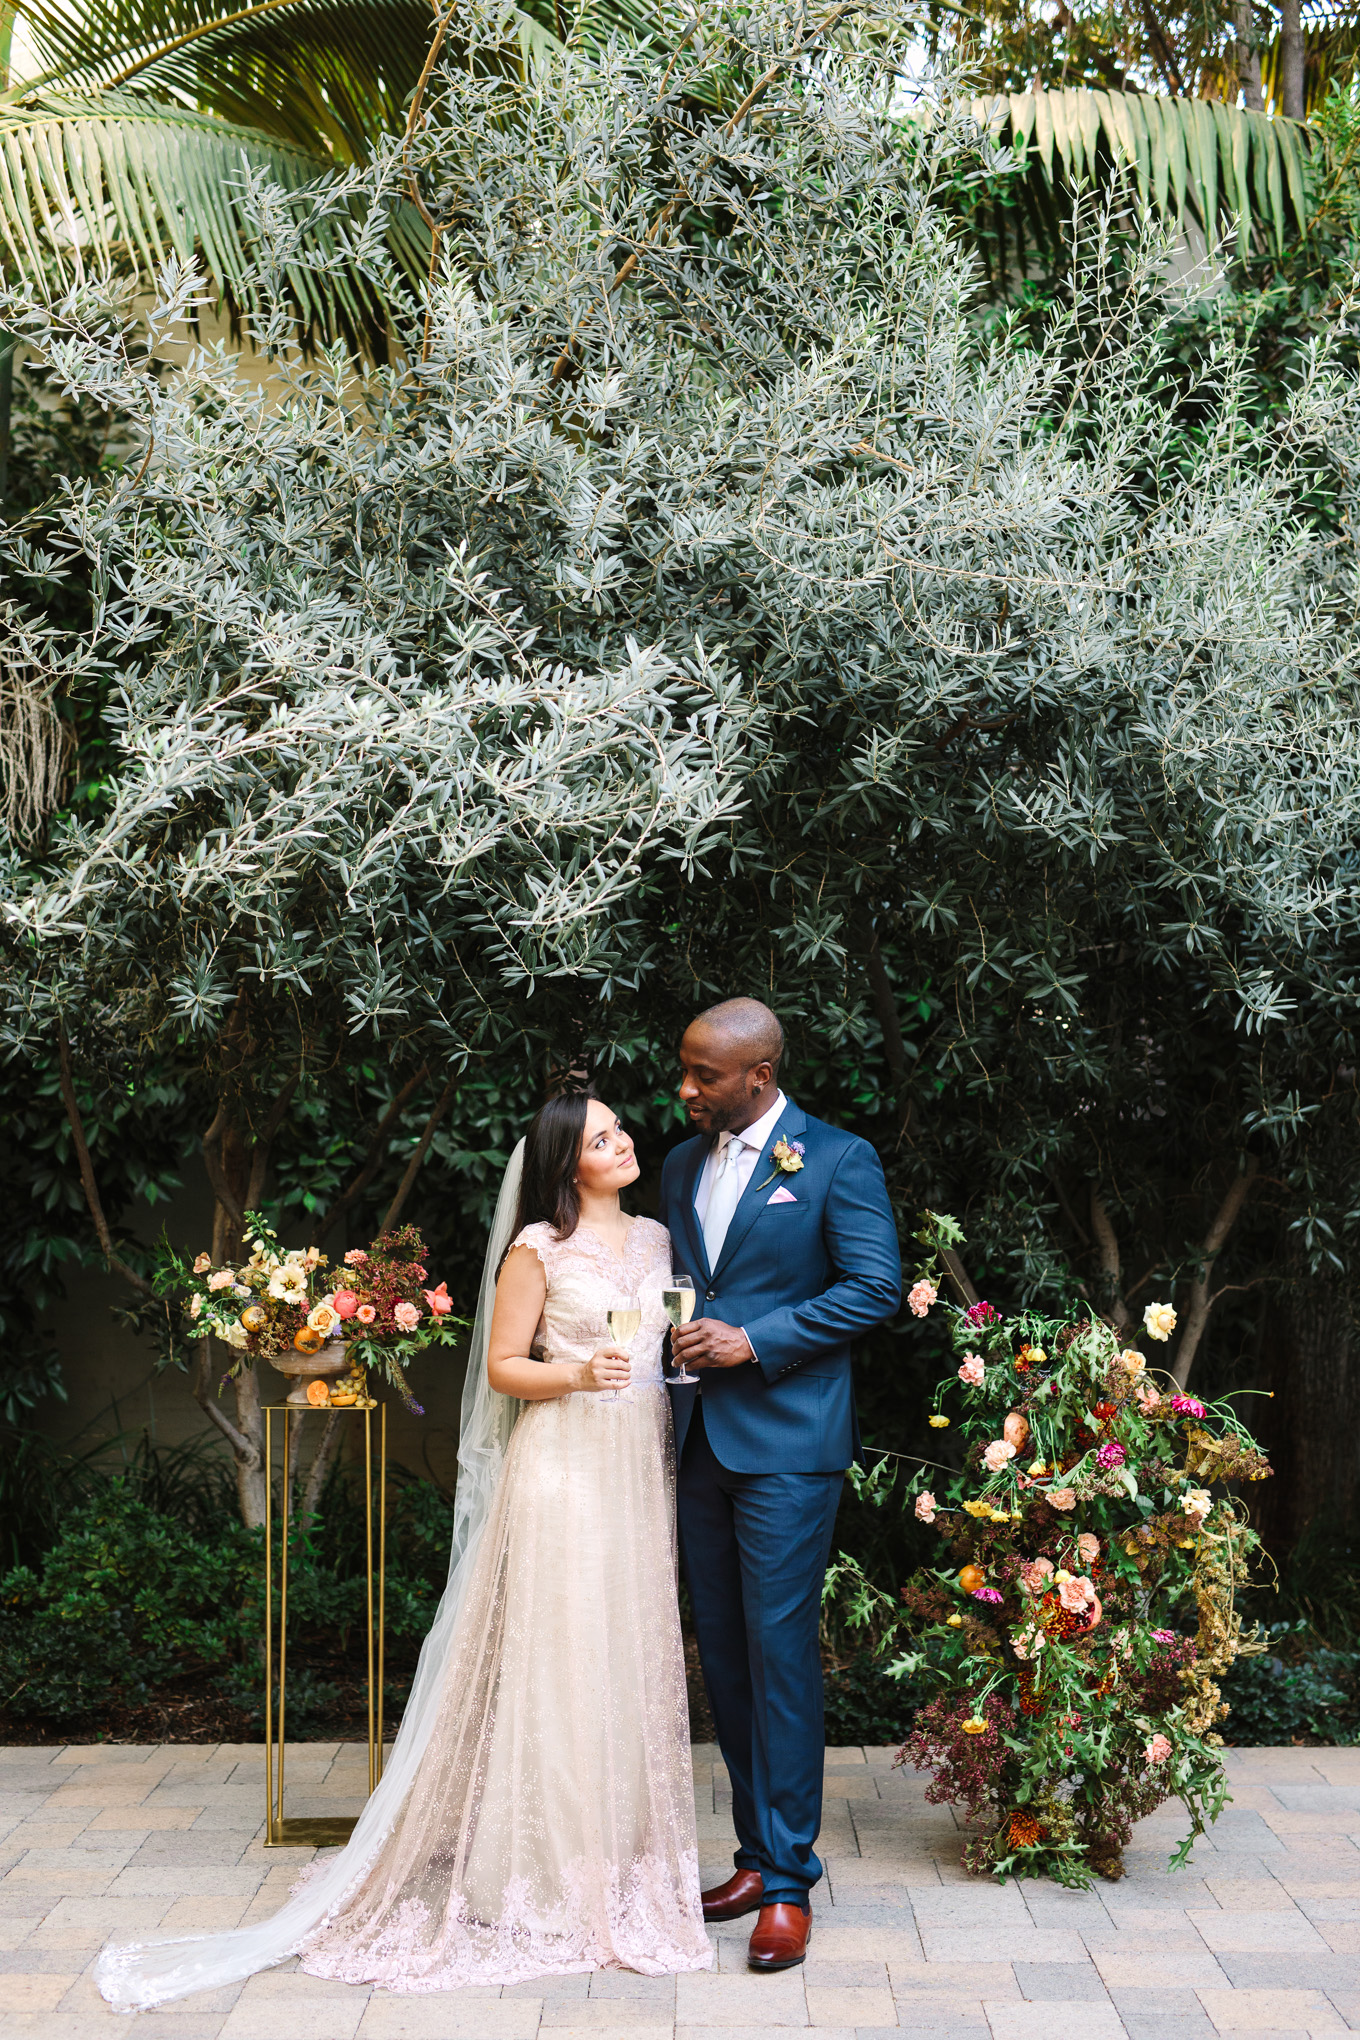 Bride and groom toasting in Vibiana Courtyard | Best Southern California Garden Wedding Venues | Colorful and elevated wedding photography for fun-loving couples | #gardenvenue #weddingvenue #socalweddingvenue #bouquetideas #uniquebouquet   Source: Mary Costa Photography | Los Angeles 